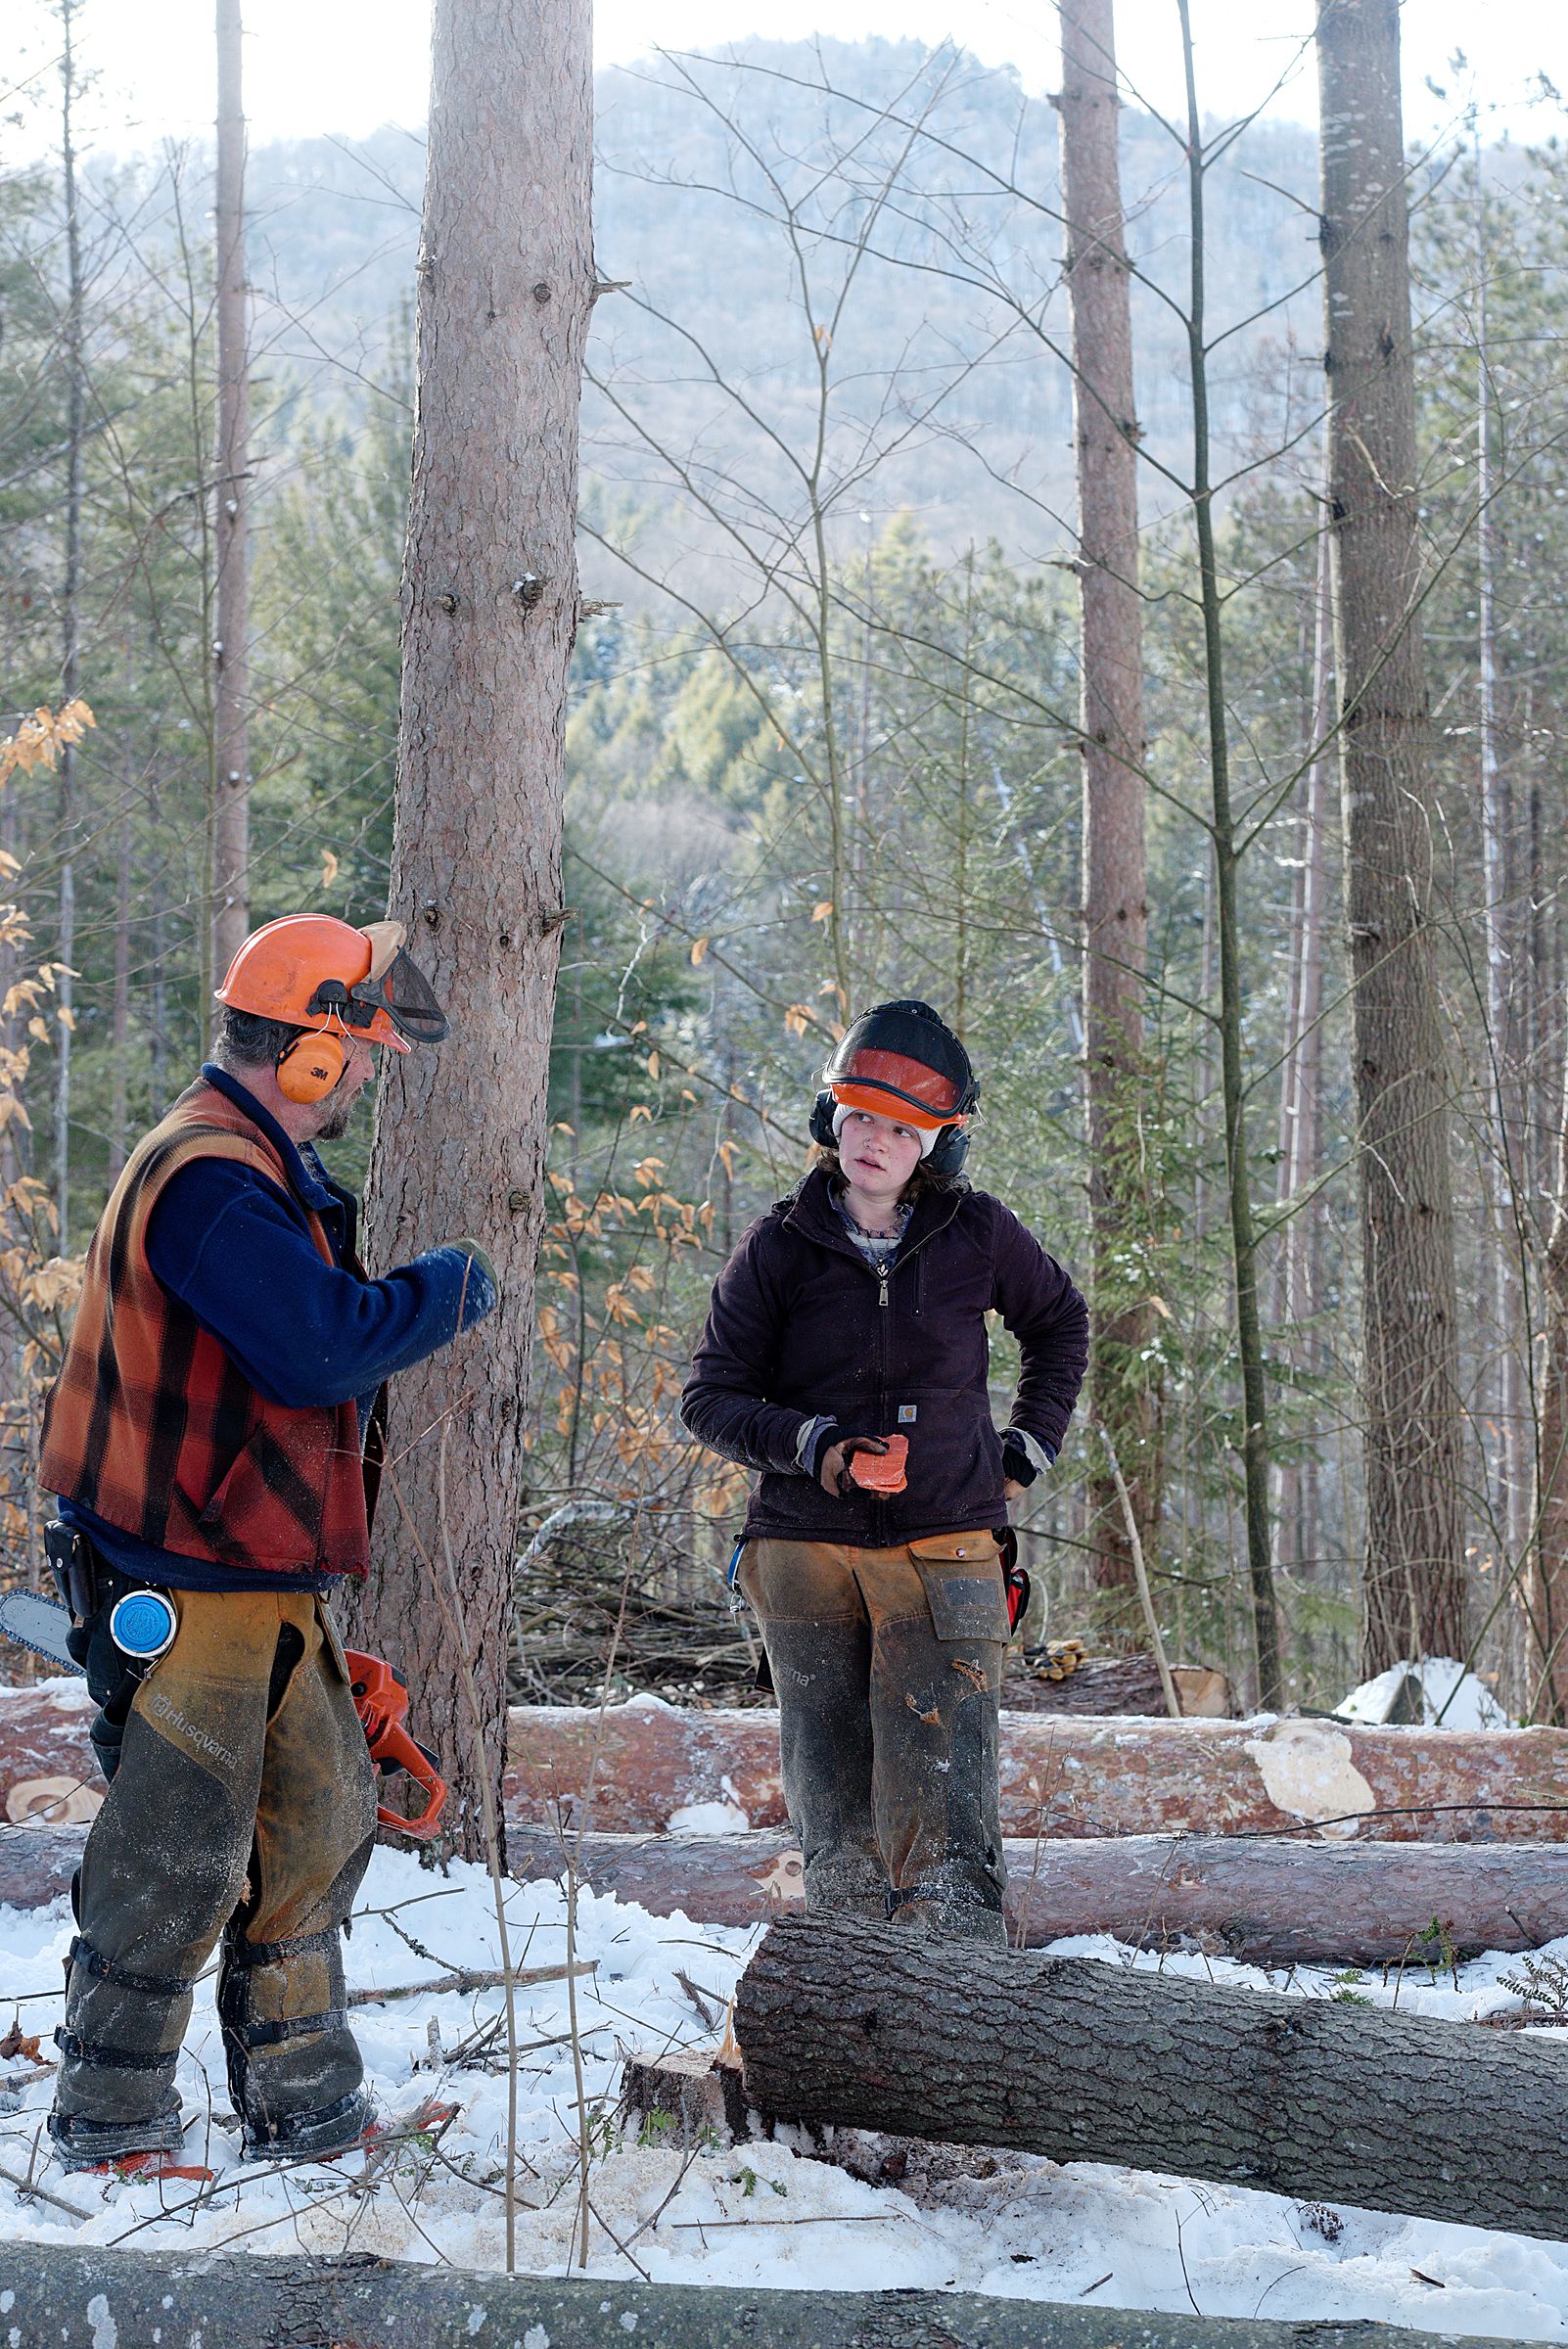 Tuilelaith Nepveu-McCrory, right, listens to advice from her dad, Carl Russell while clearing pasture in Bethel Gilead, Vt., Thursday, Jan. 13, 2021. Nepveu-McCrory felled and limbed trees as Russell kept the area clear and logs organized with his oxen. (Valley News - James M. Patterson) Copyright Valley News. May not be reprinted or used online without permission. Send requests to permission@vnews.com.